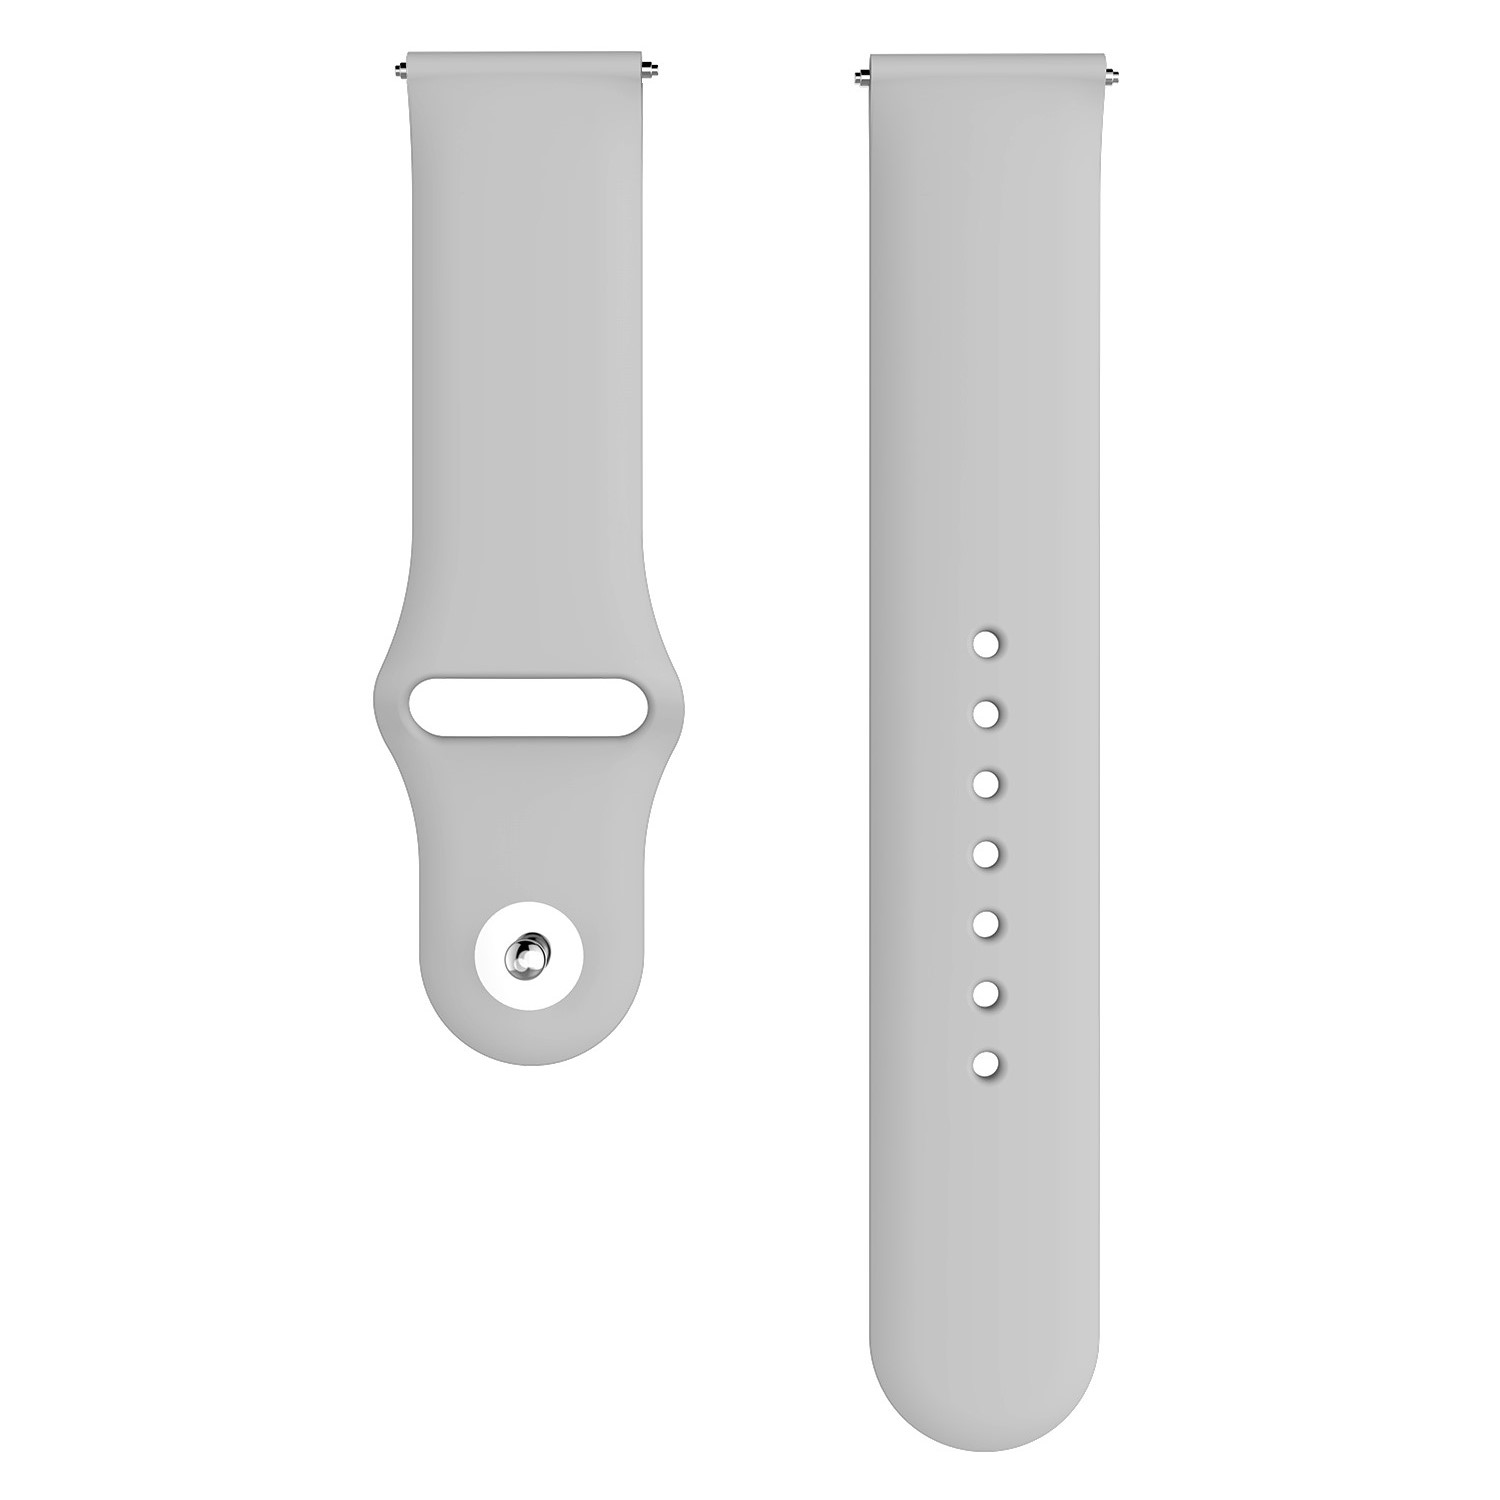 Bakeey-20mm-Watch-Band-Universal-for-BW-HL1Galaxy-Watch-Active-2Amazfit-Bip-Lite-Smart-Watch-1559776-3